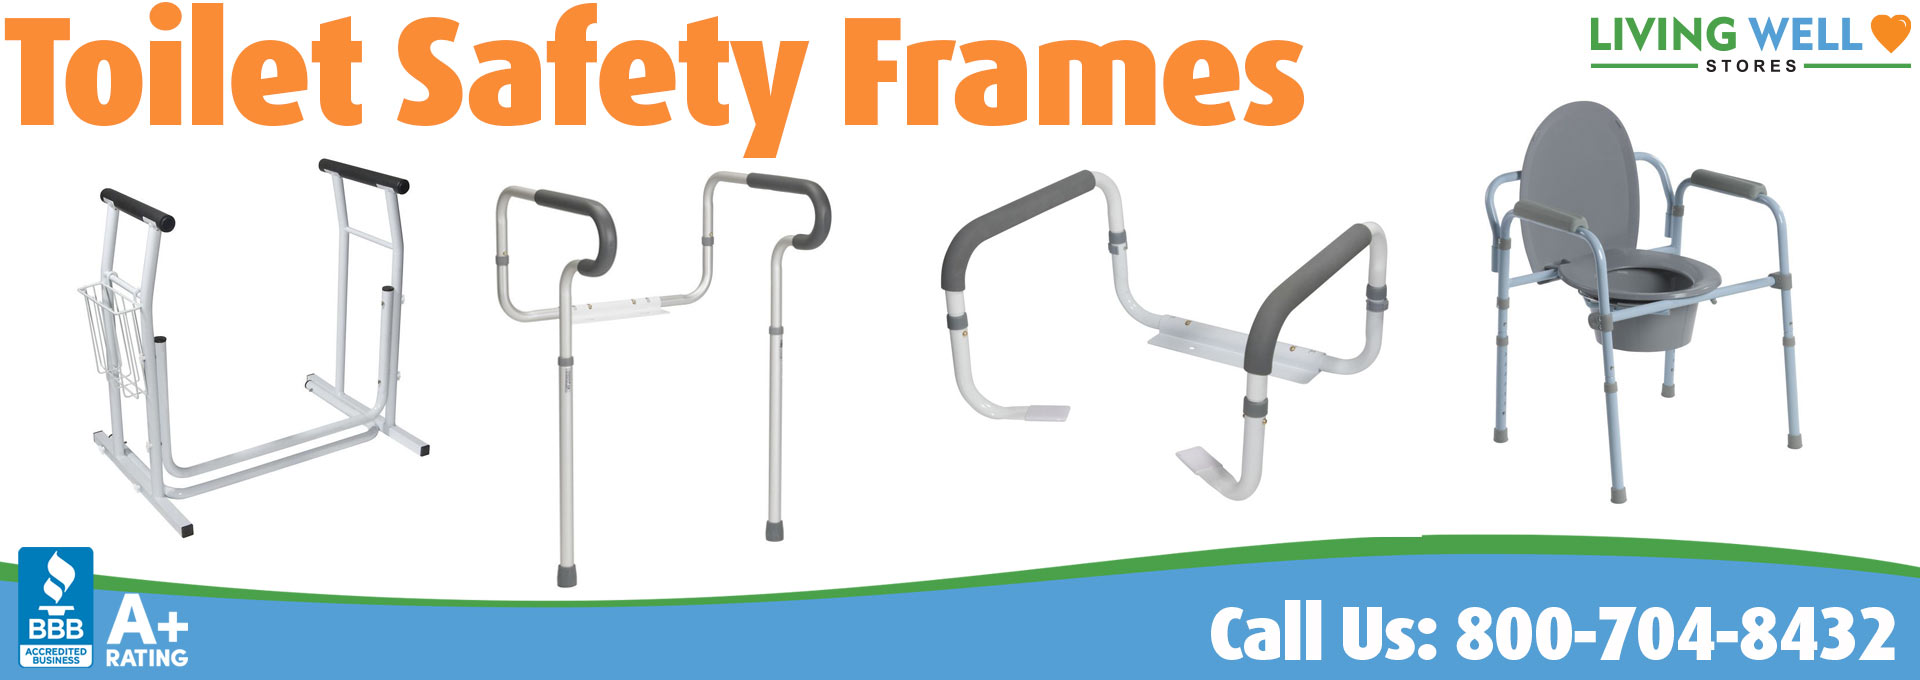 Living Well Stores: Toilet Safety Frames